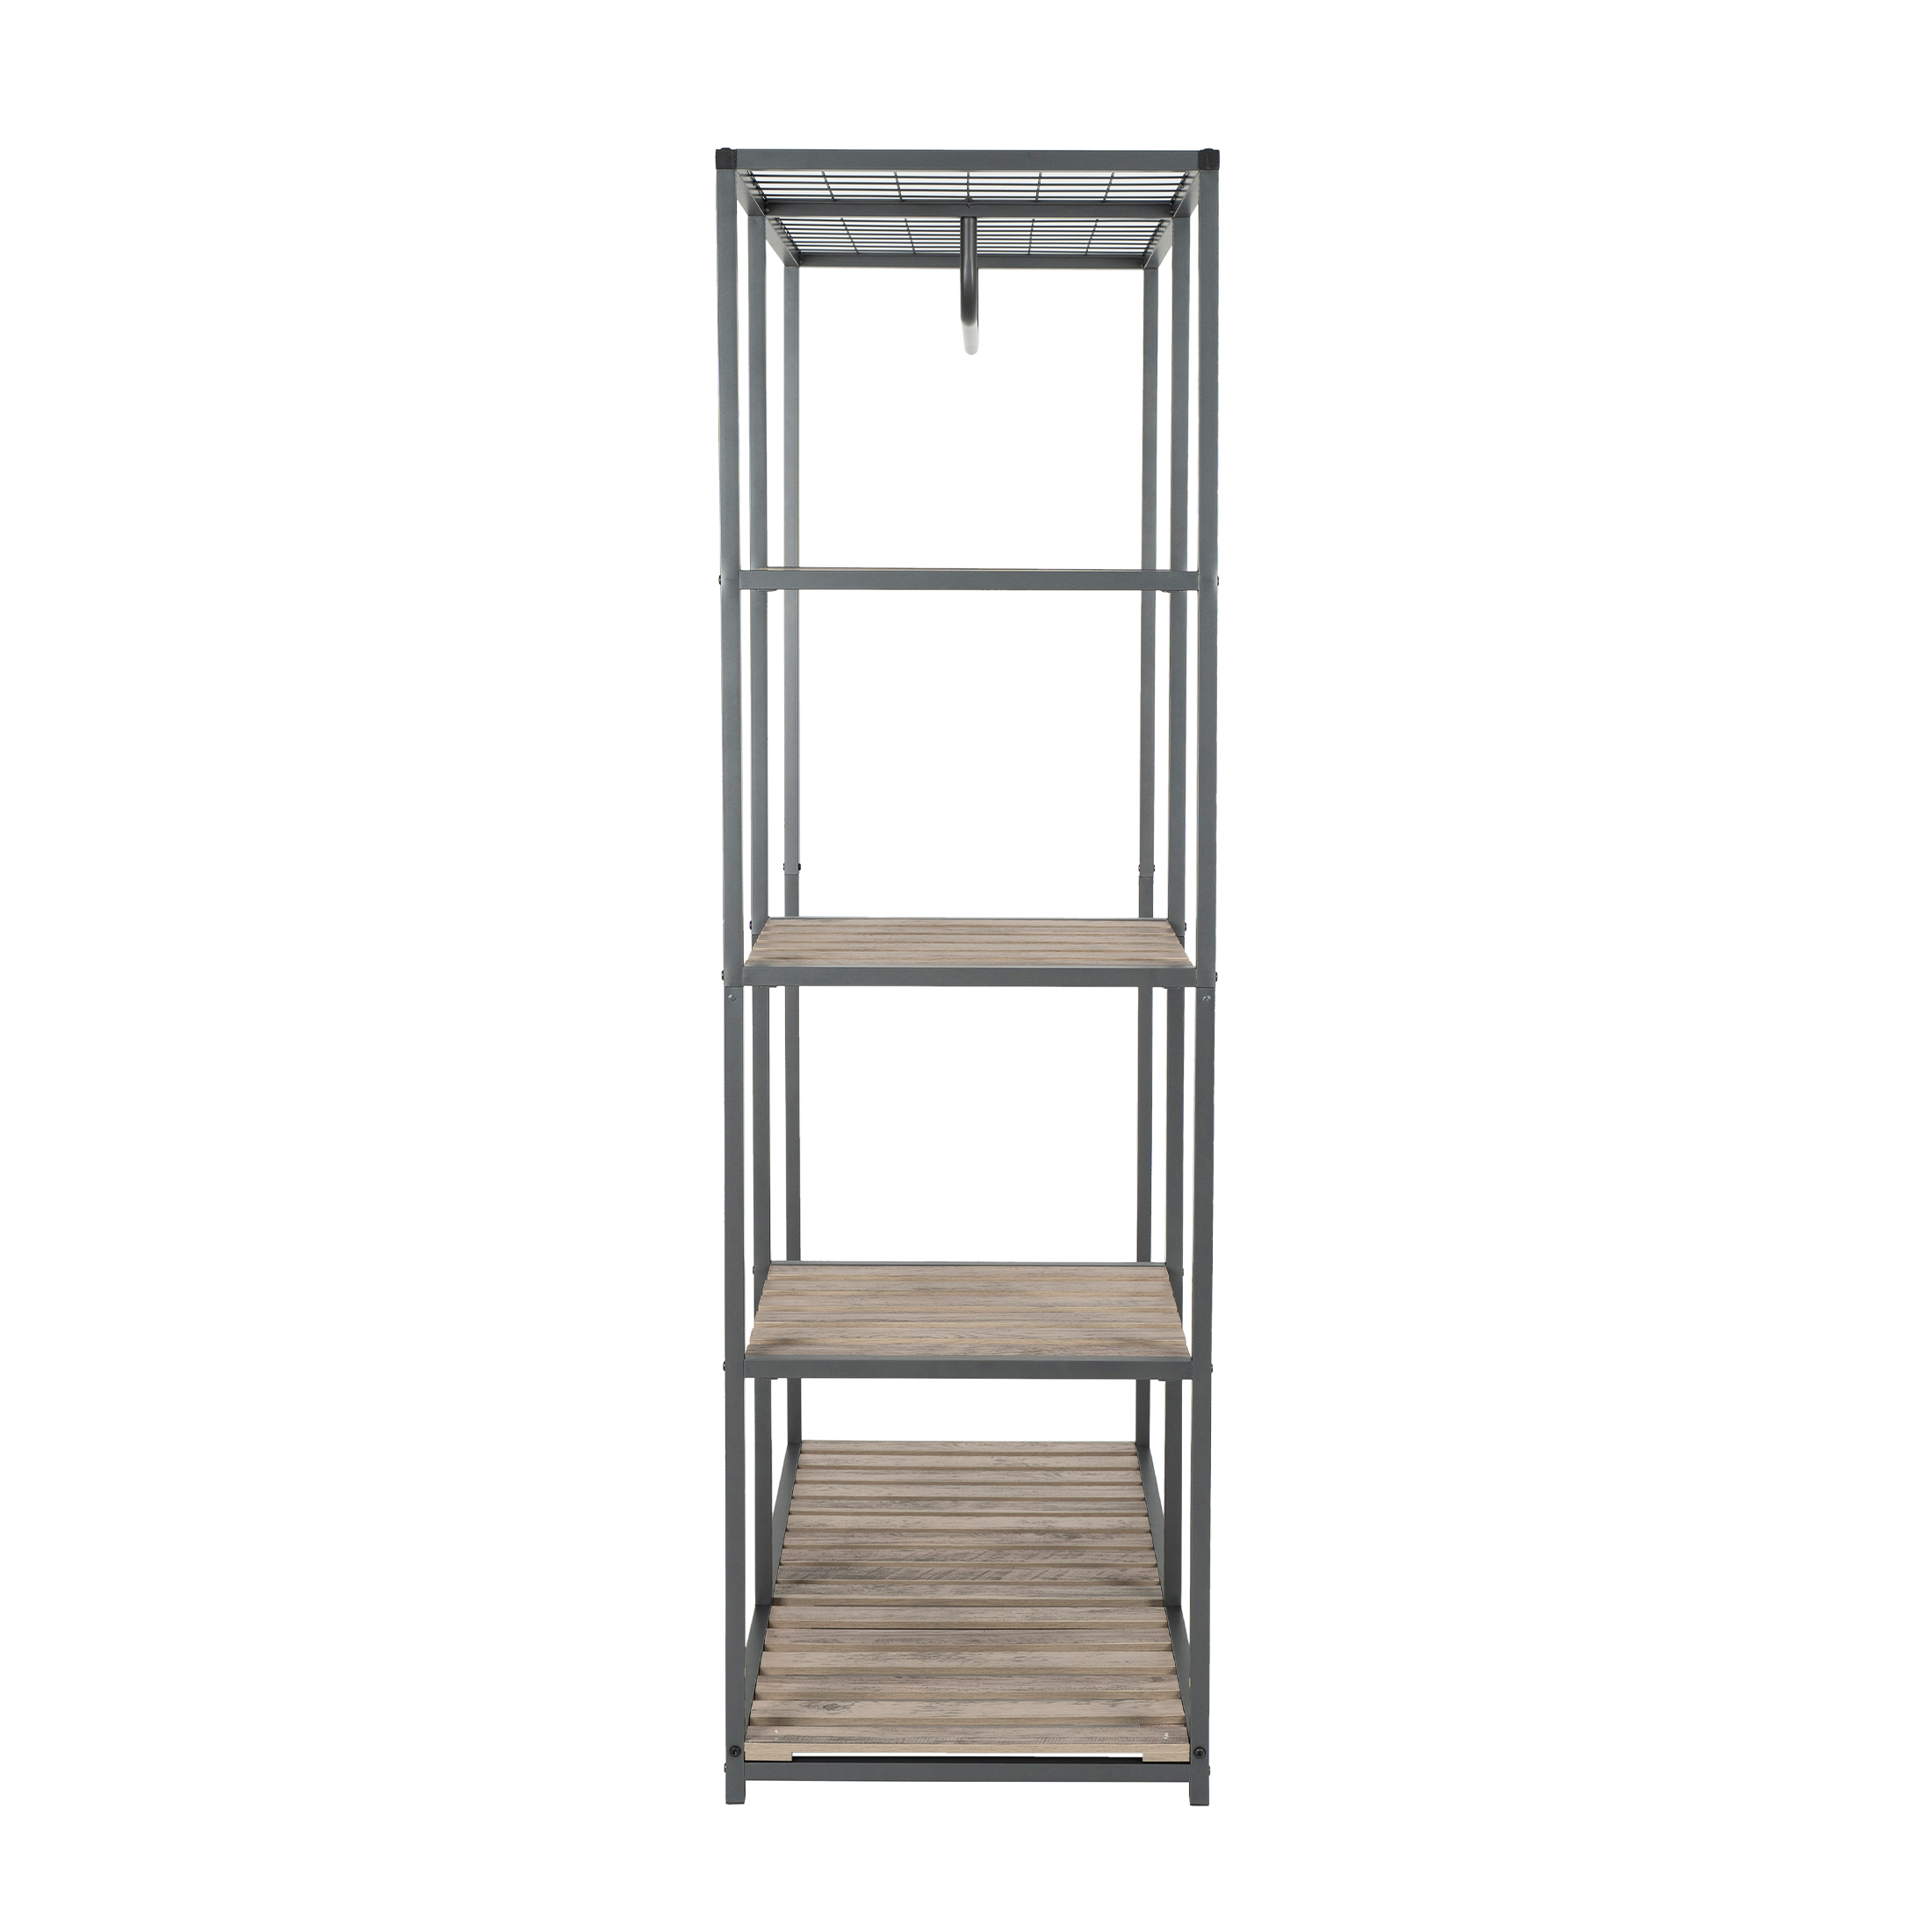 Better Homes & Gardens Farmhouse Gray Wood and Metal Garment Rack - image 5 of 7